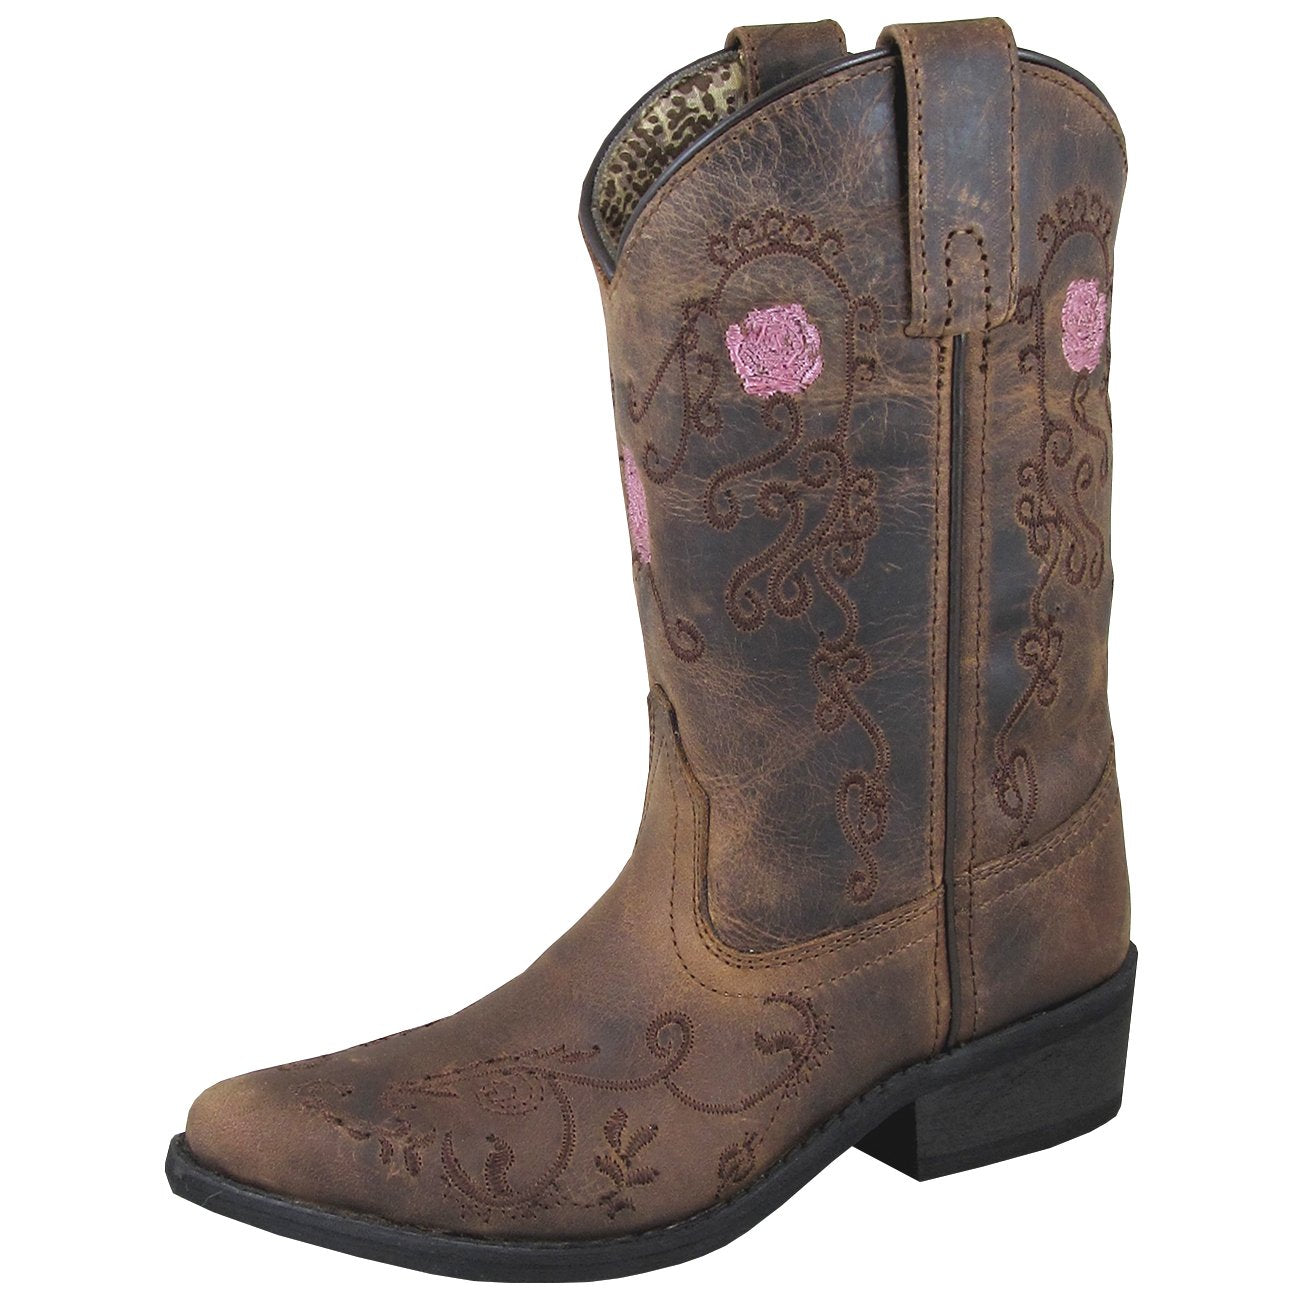 Smoky Mountain Girl's Youth Rosette Brown Oil Distress Cowboy Boot